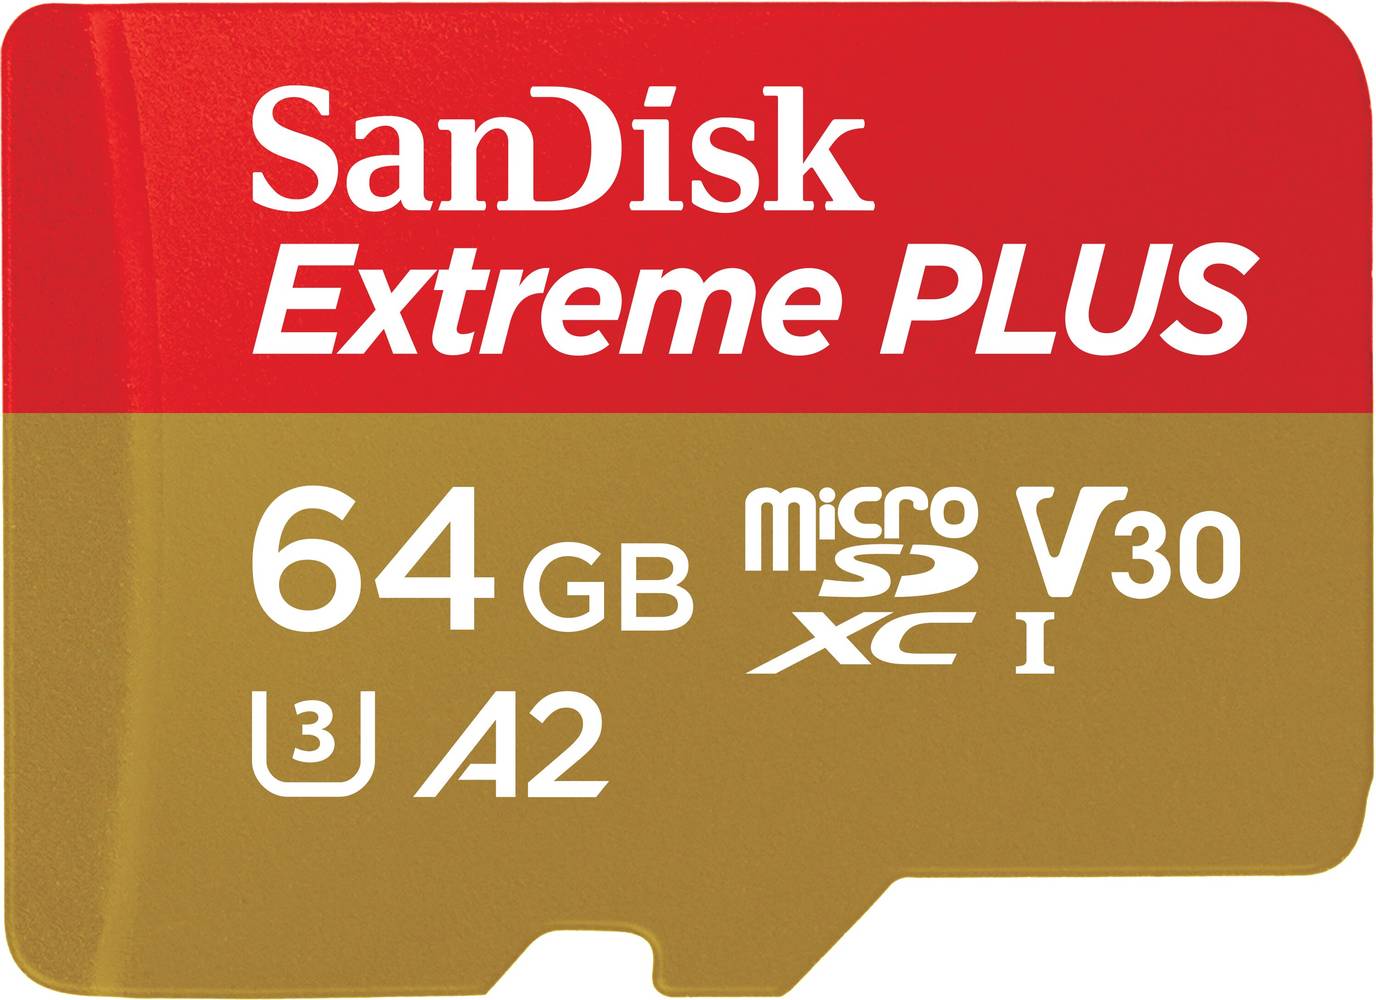 Sandisk 64gb Extreme Plus Microsd Uhs-I Card With Adapter